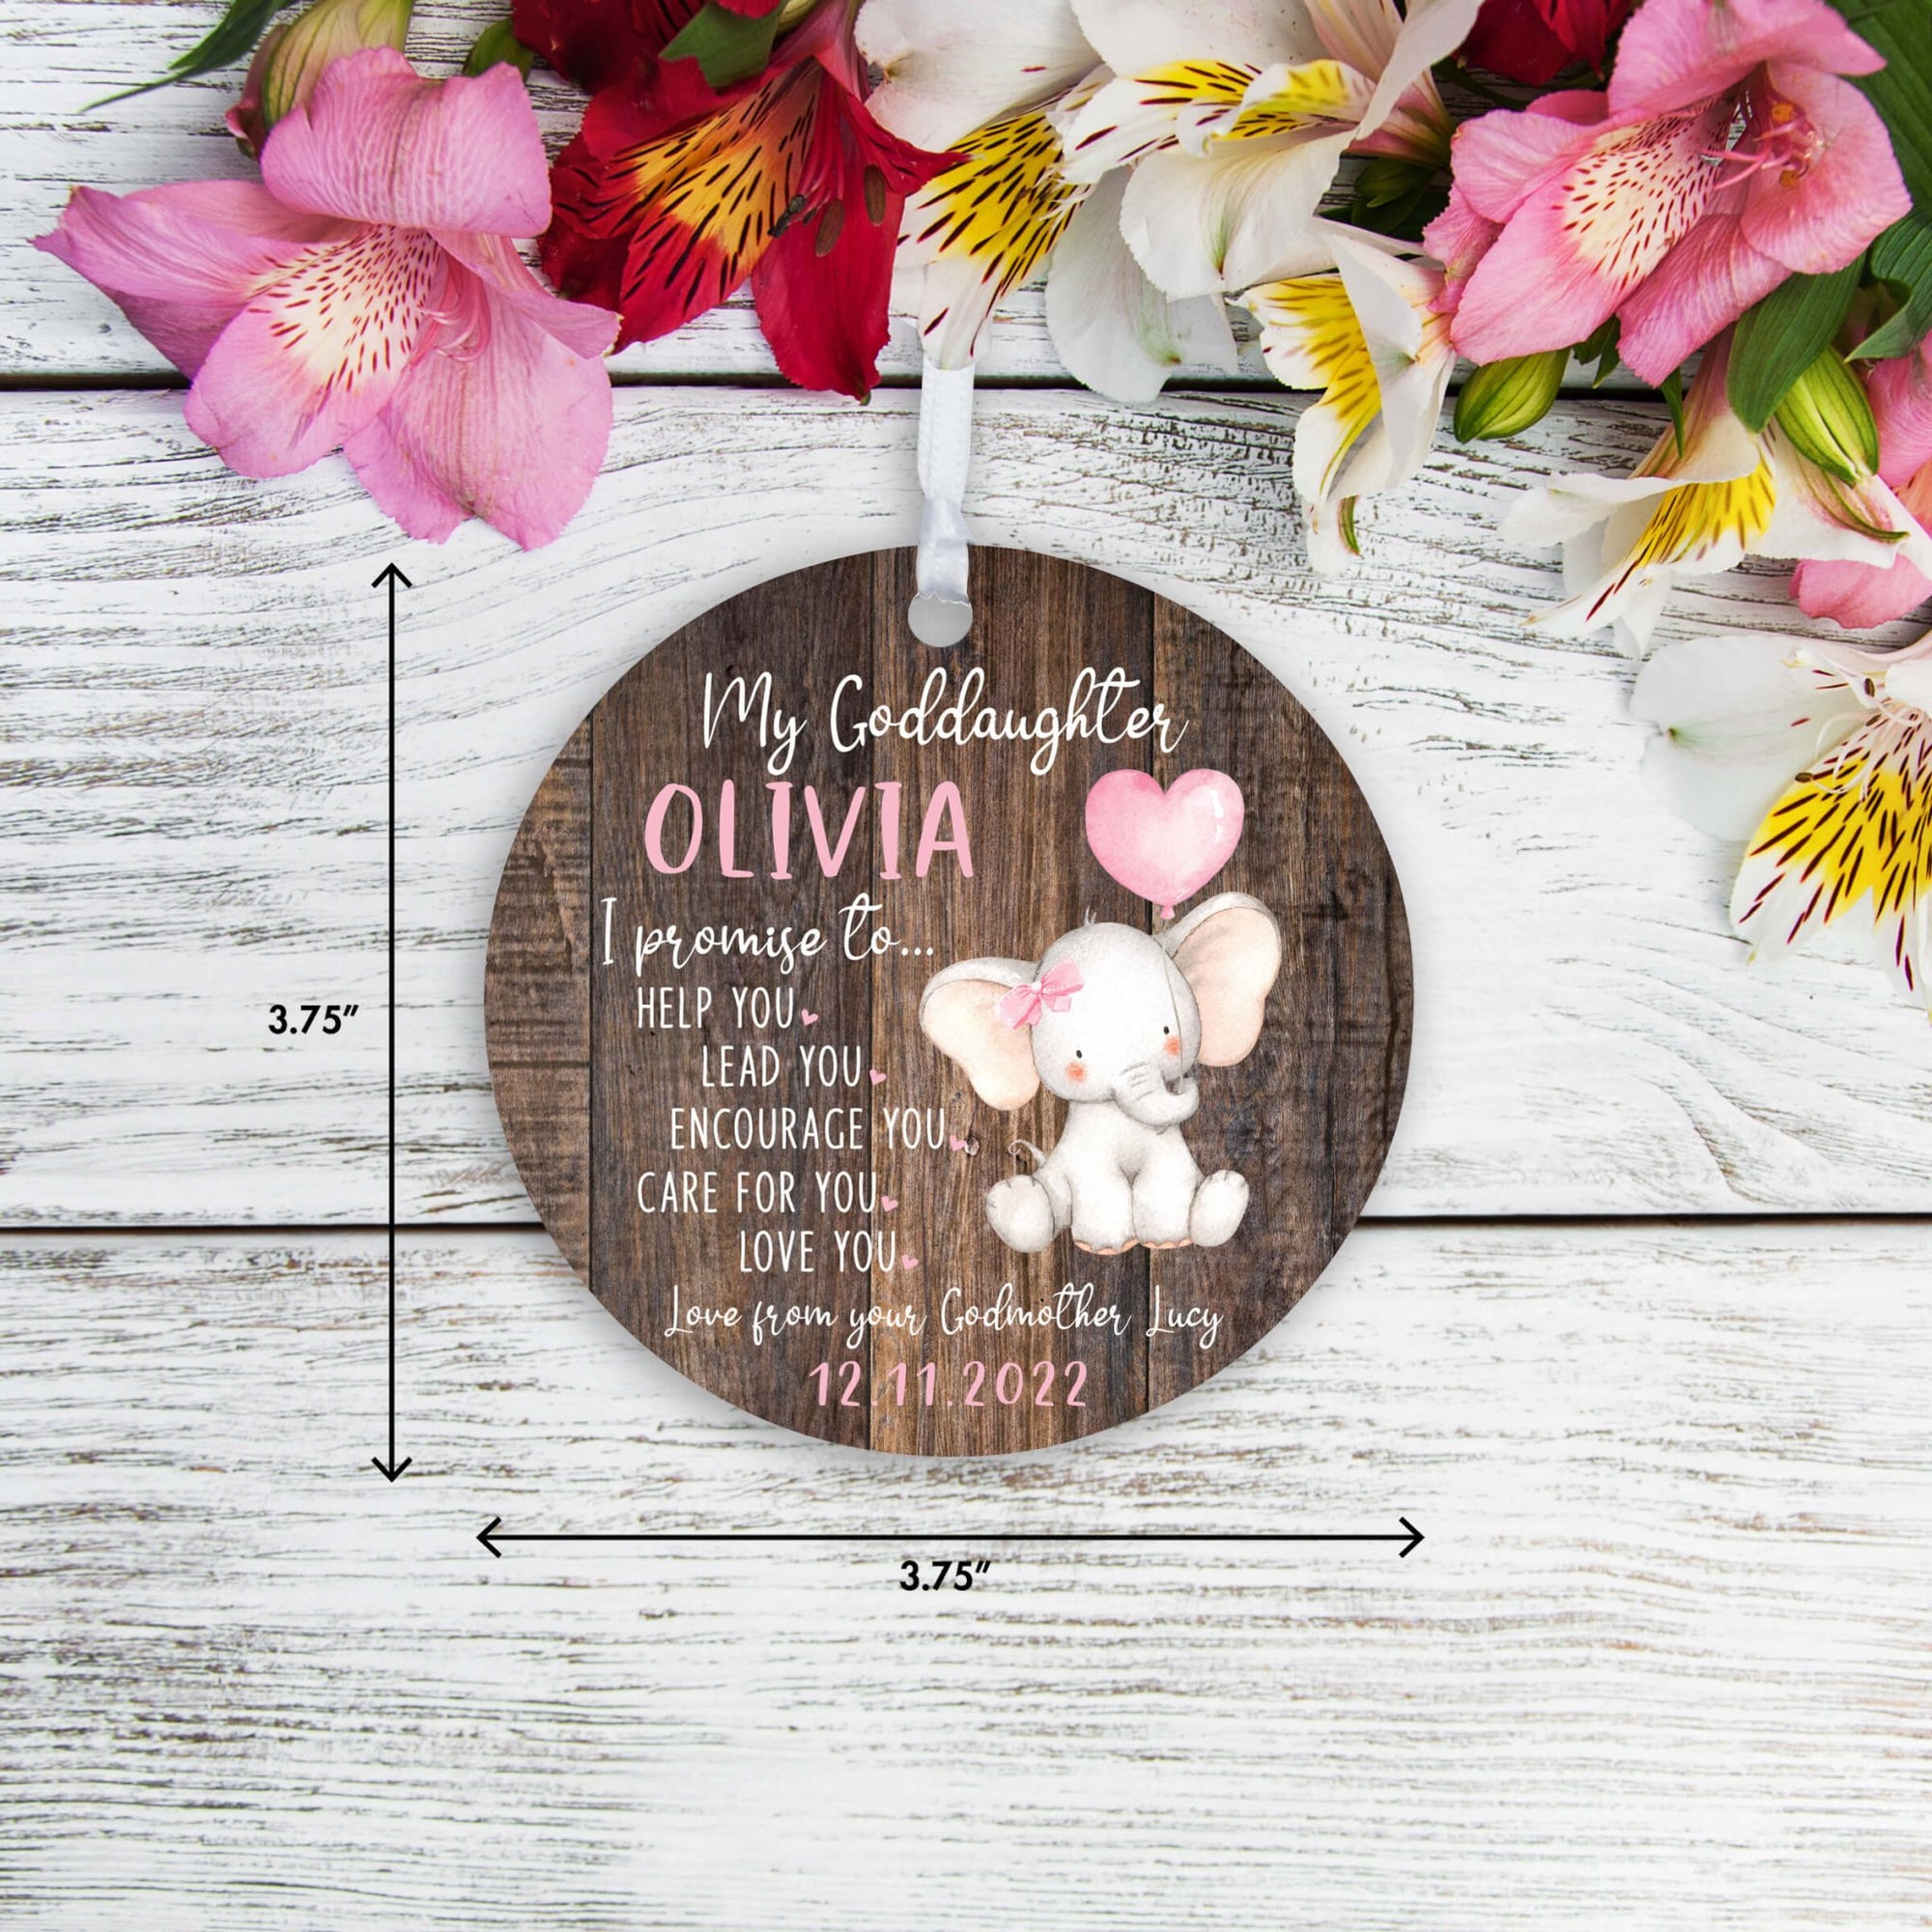 Lifesong Milestones Personalized Baptism Hanging Ornament